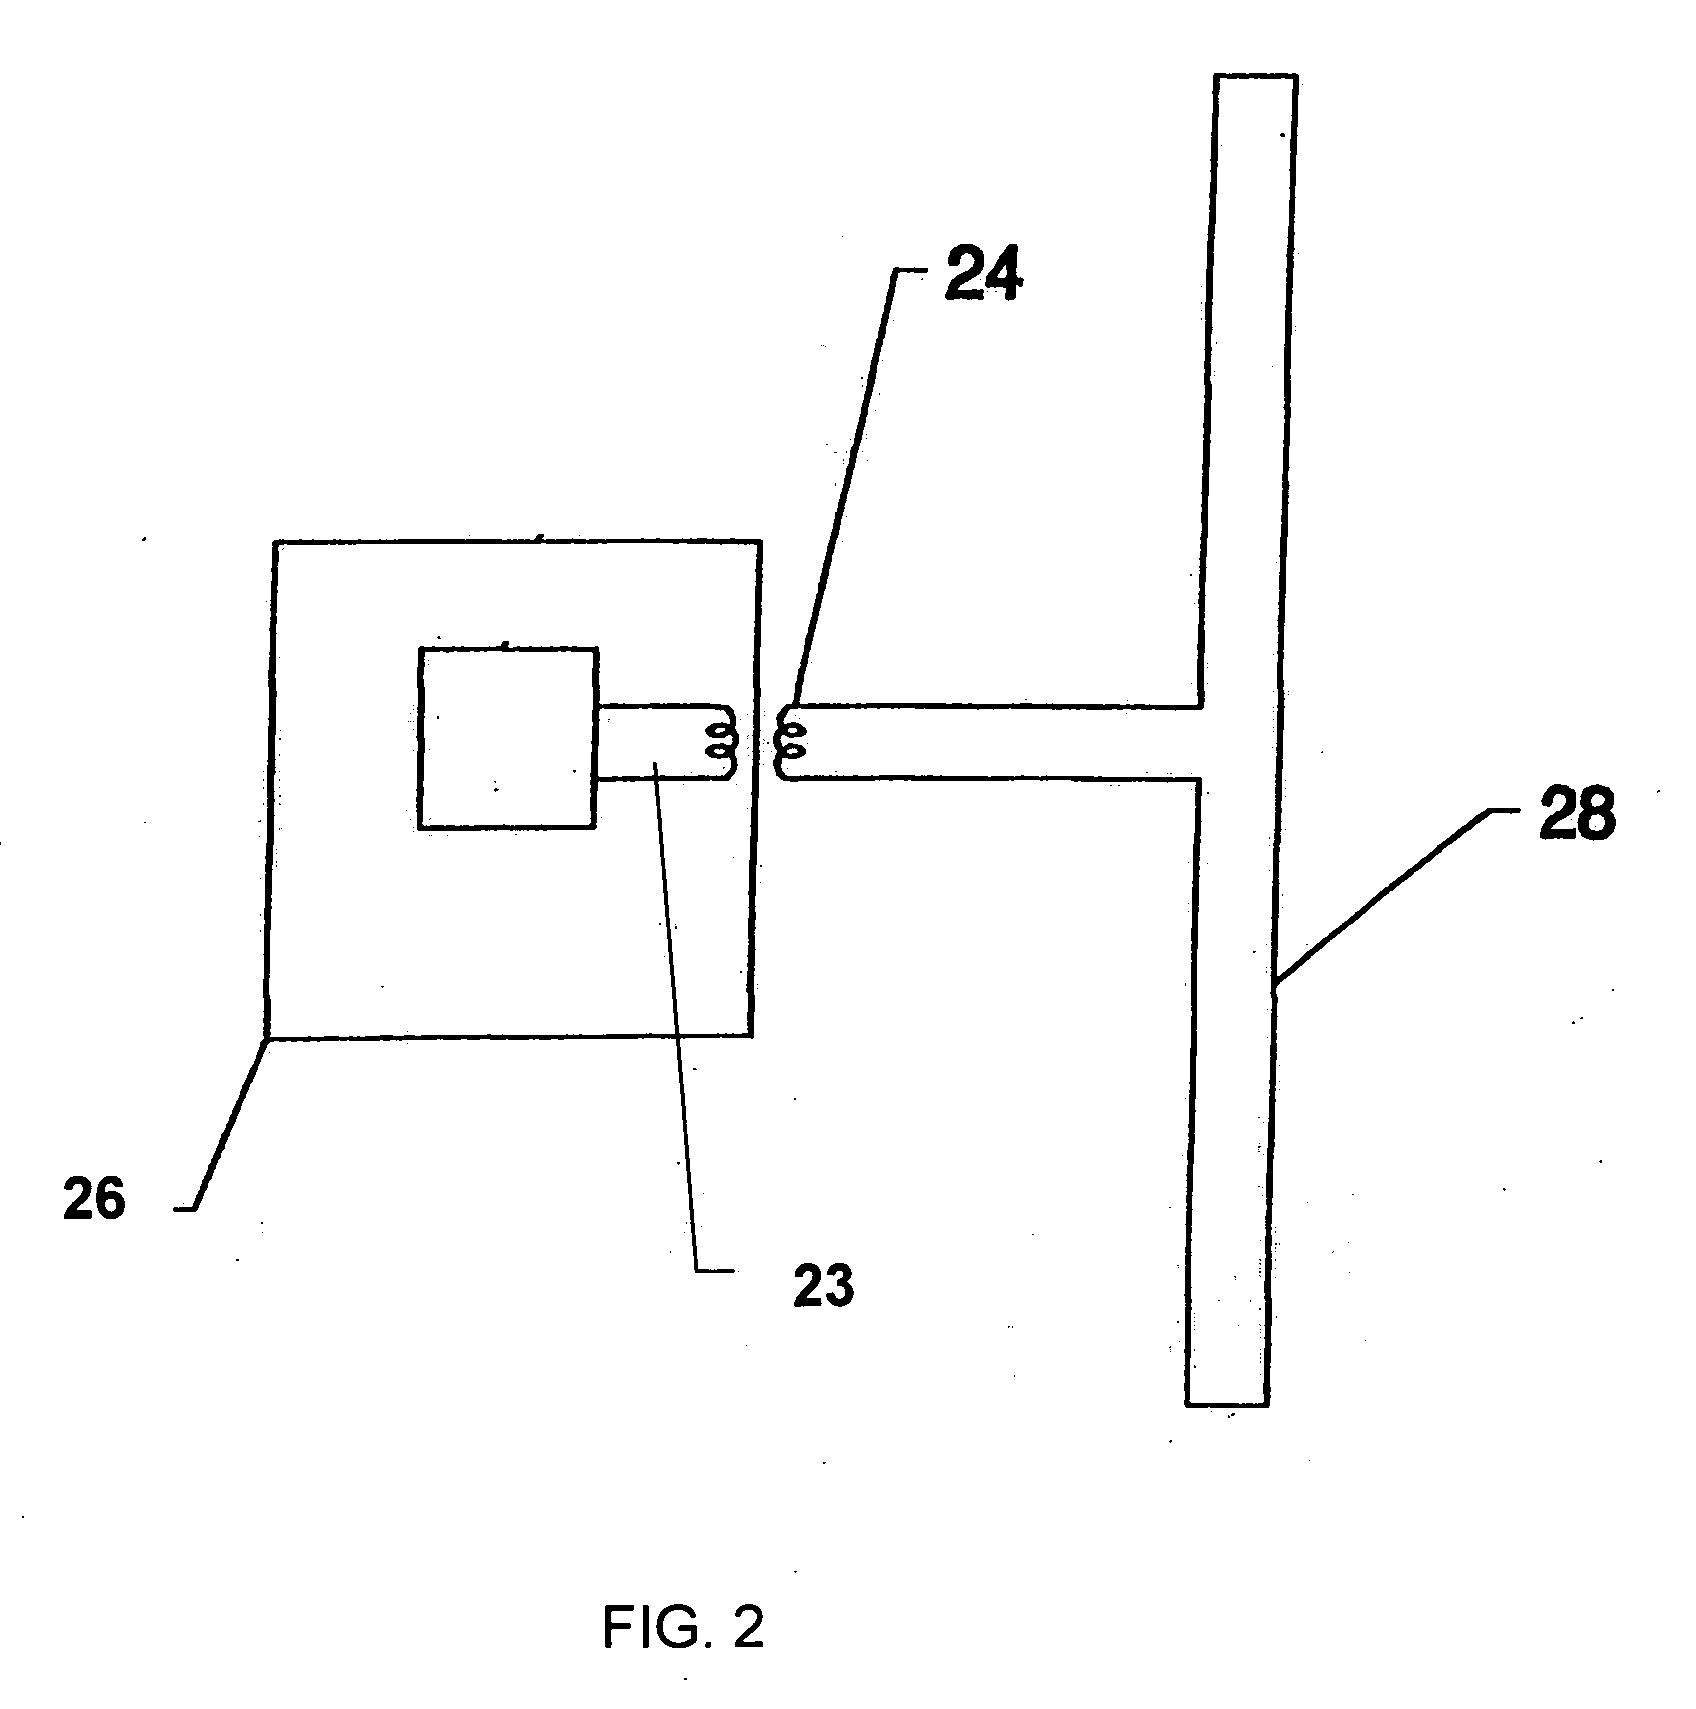 Process for manufacture of novel, inexpensive radio frequency identification devices